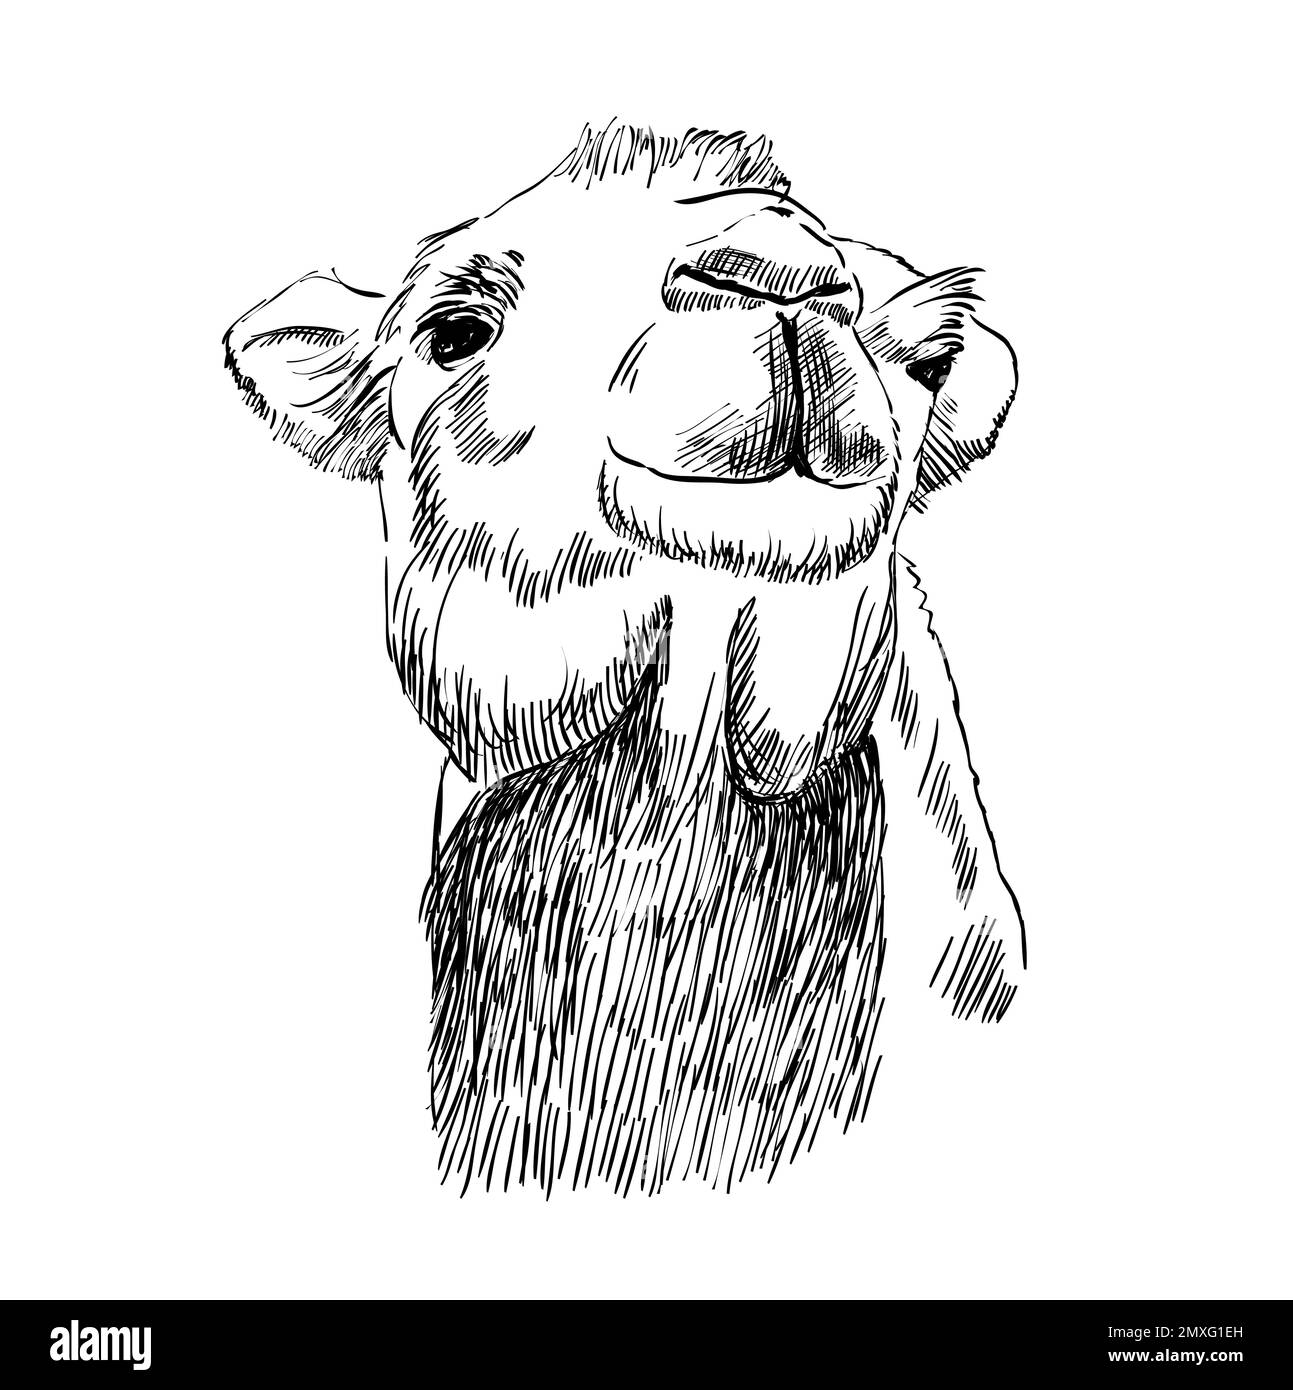 Camel art Black and White Stock Photos & Images - Alamy